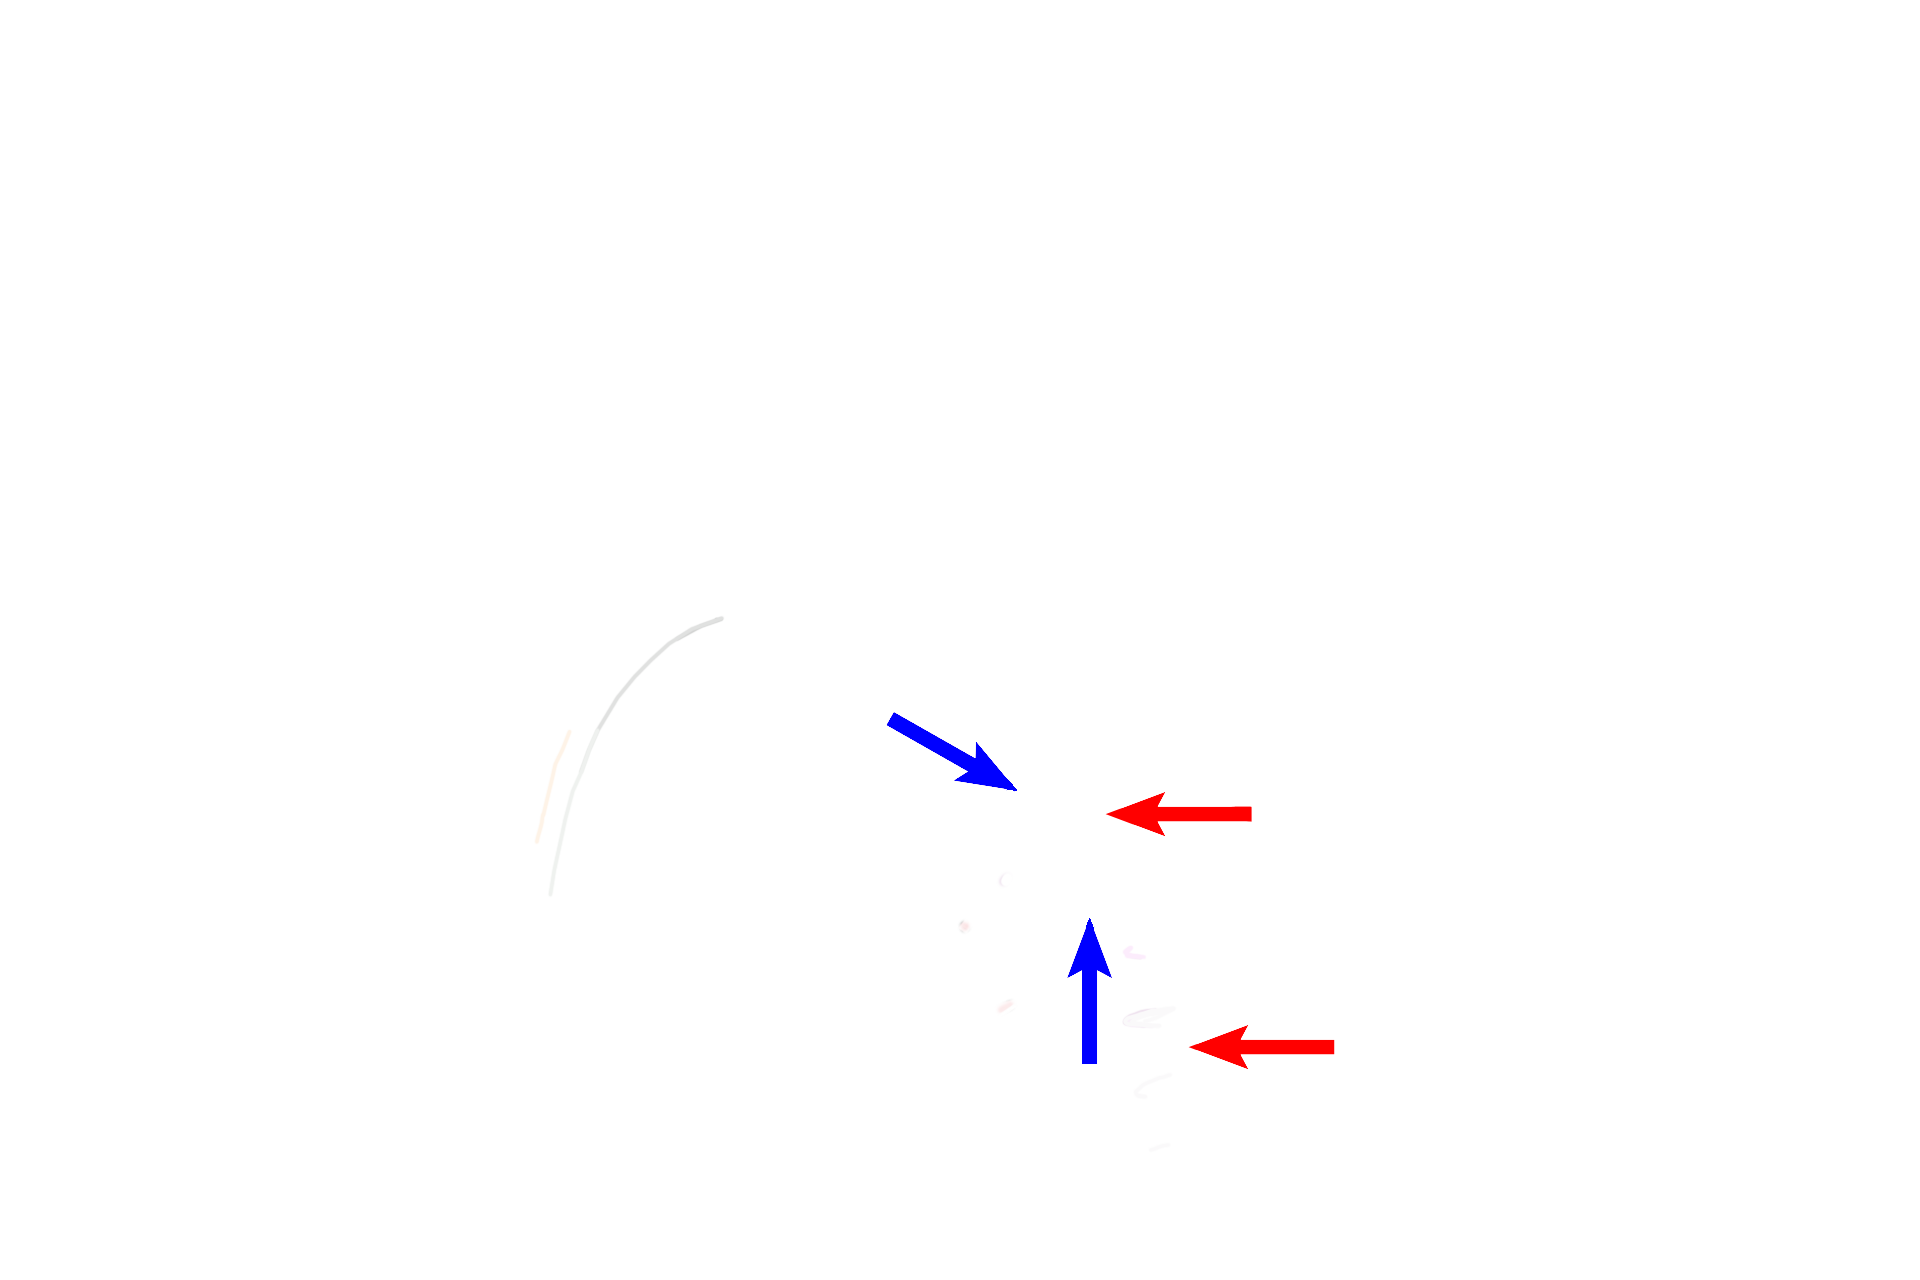  - Epididymal ducts > <p>An epididymis lies posterior to each testis.  Ducts in the epididymis consist of 15-20 efferent ducts (blue arrows) that are coiled into cone shapes in the head of the epididymis.  Efferent ducts anastomose to form the duct of the epididymis (red arrows), a single, highly coiled tube that fills the remainder of the head and the entirety of the body and tail of the epididymis.</p>
